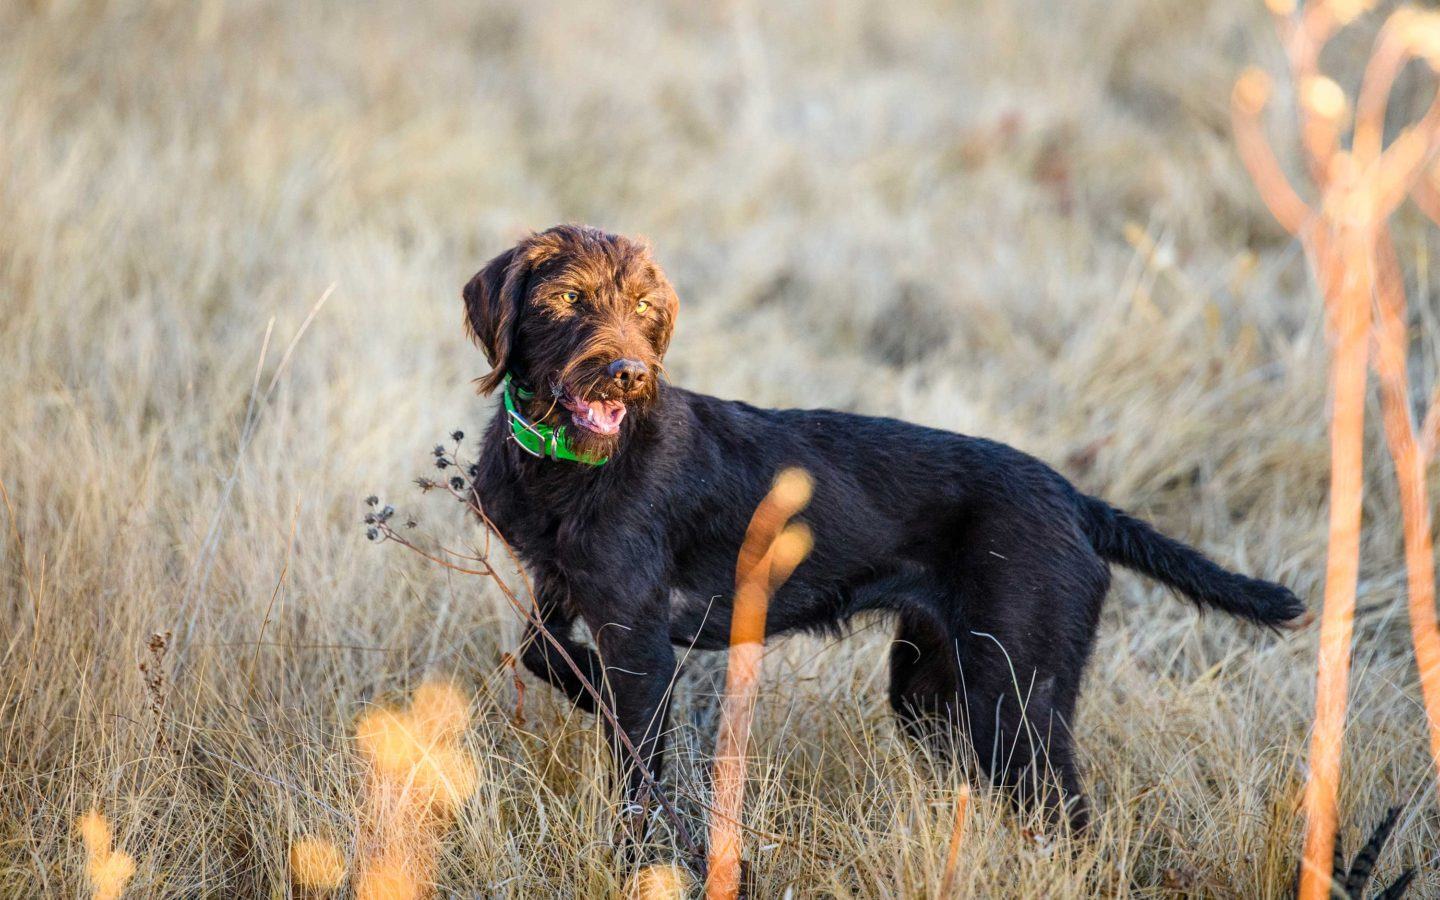 brown hunting dog with a green collar standing in a field